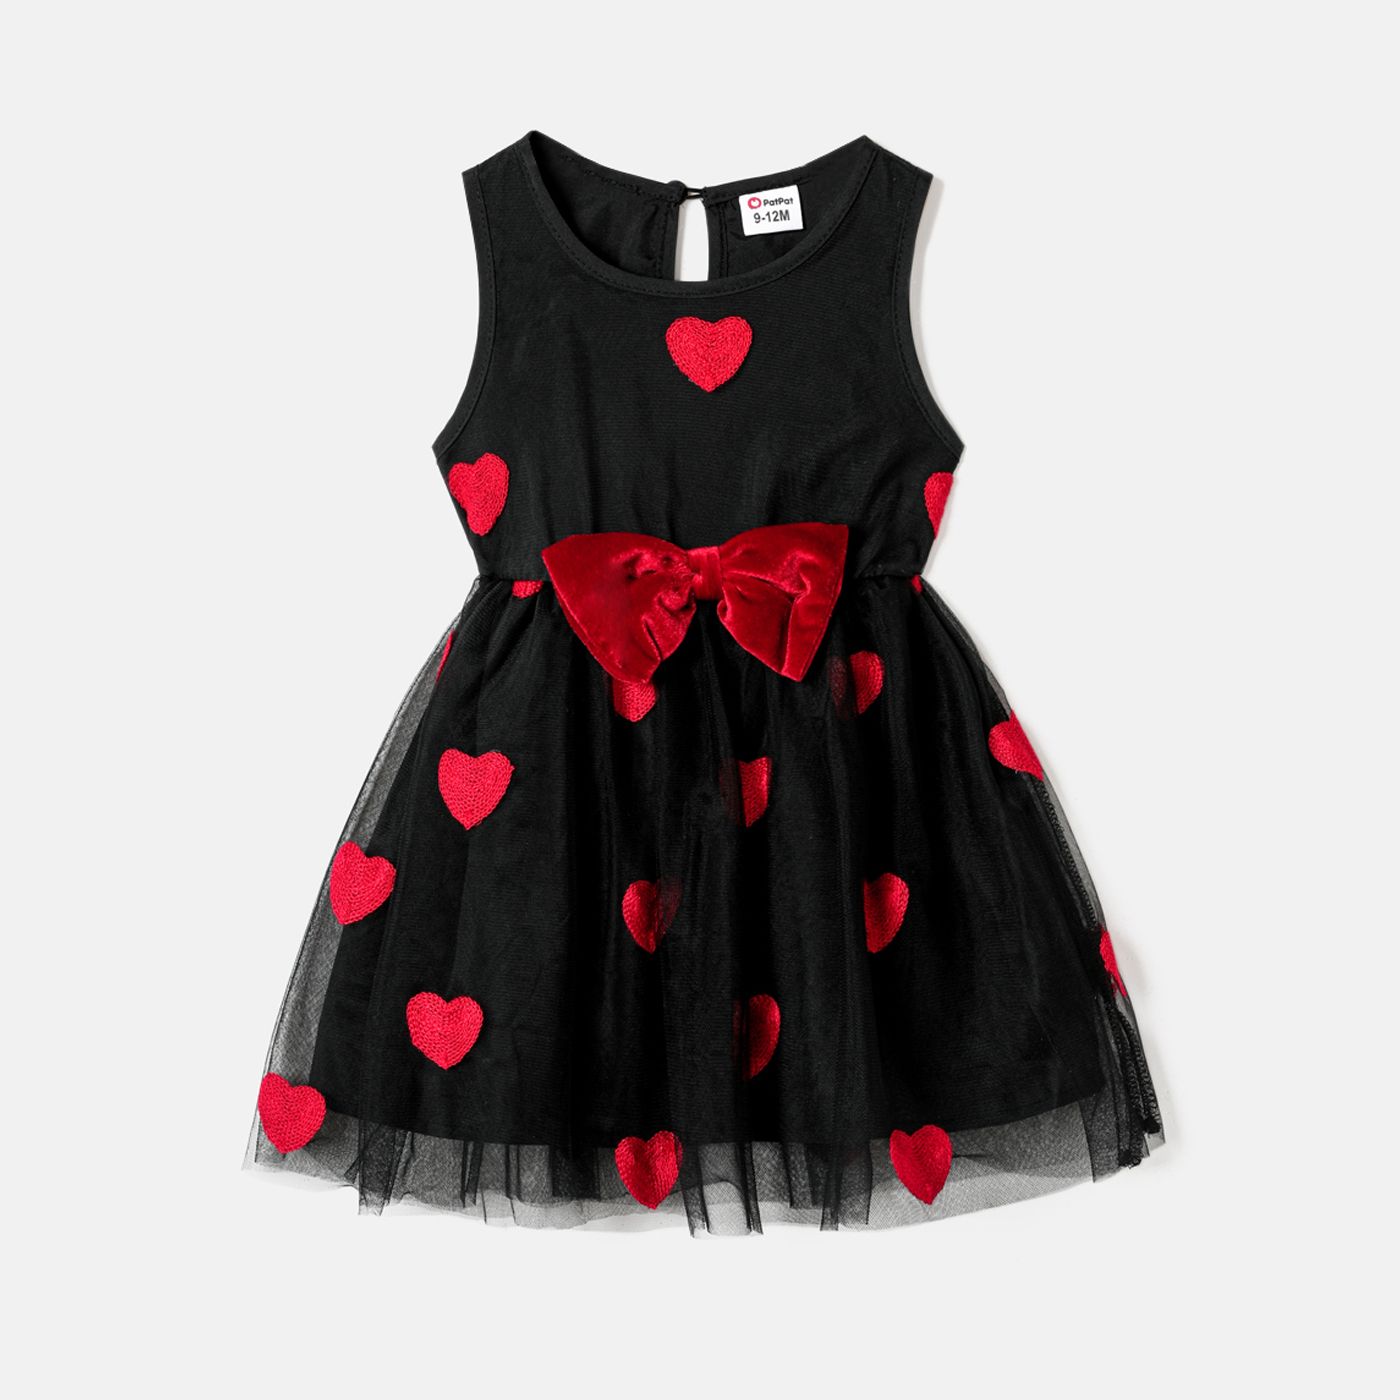 Mommy And Me Allover Heart Embroidered Sleeveless Belted Black Sheer Mesh Dresses